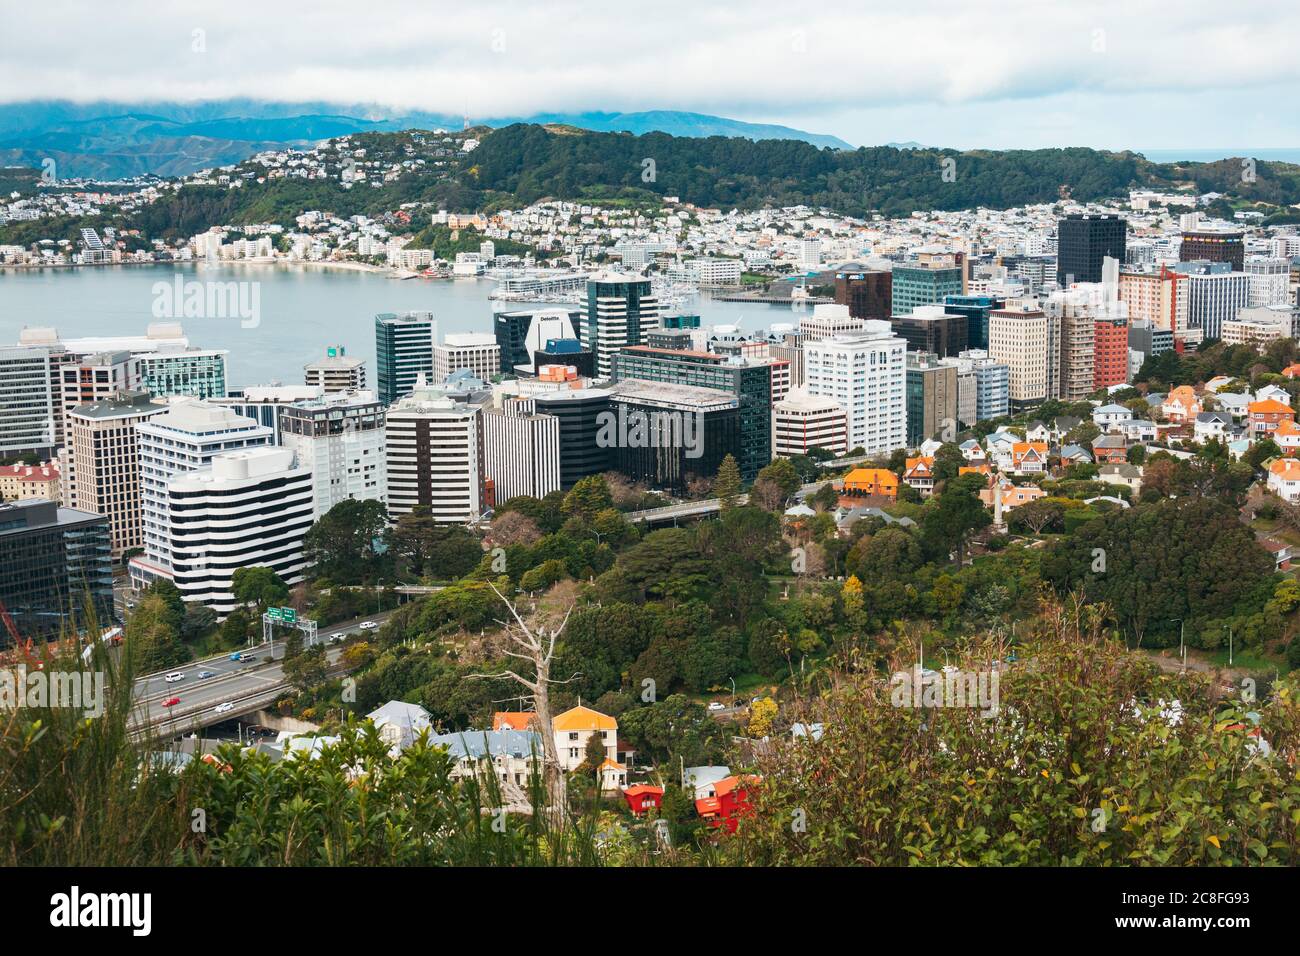 New Zealand's capital city Wellington, and its harbour, as seen from the Northern Walk on Te Ahumairangi Hill Reserve, part of the city's Town Belt Stock Photo